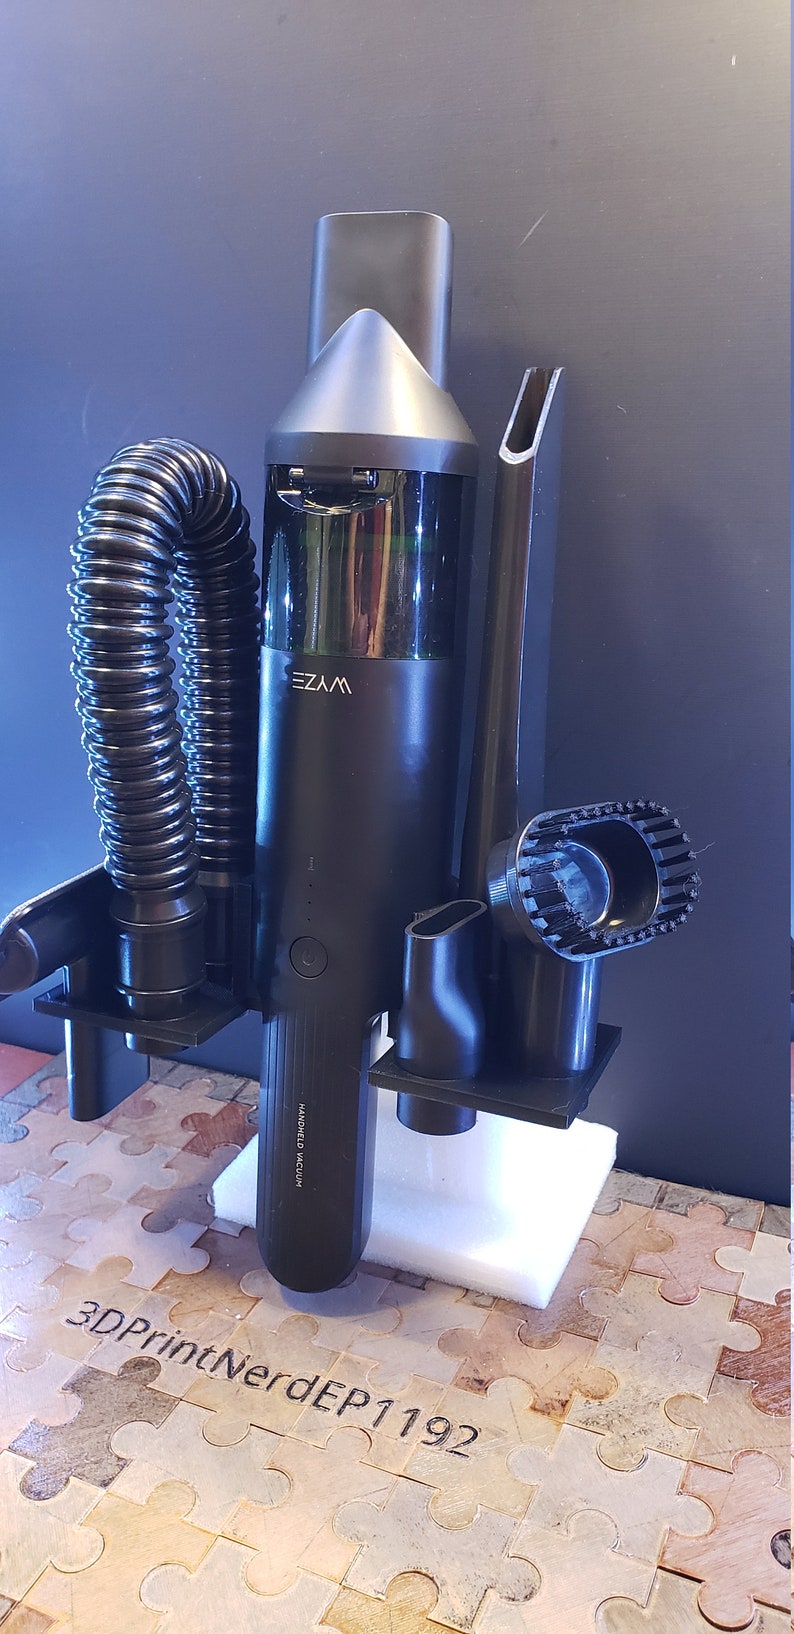 3D Printed WYZE Handheld Vacuum Wall Mount/Charging Station. Vacuum/Attachments/Cord/Charger Not Included. Hose on Side. image 2